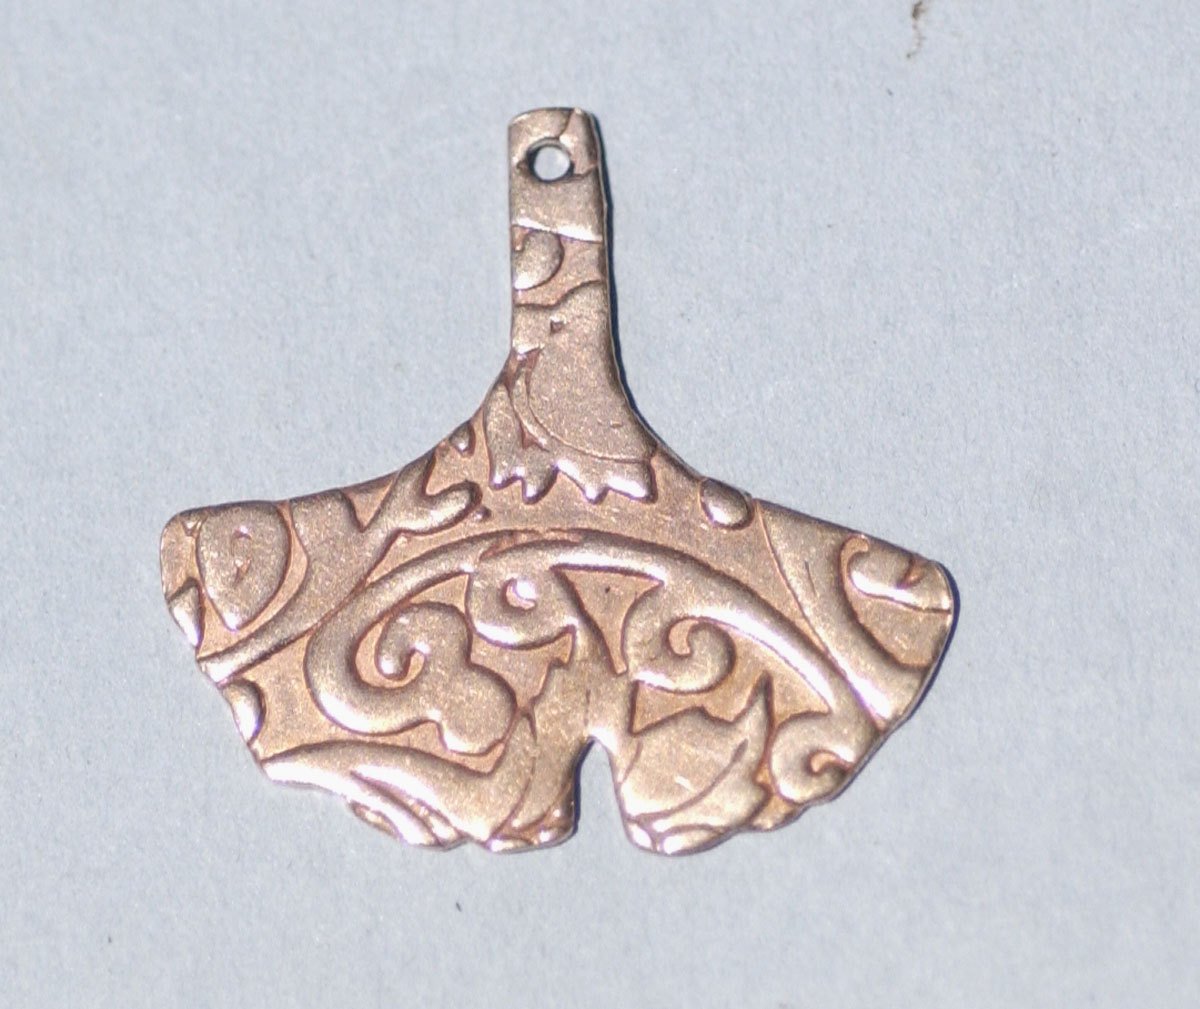 Copper Blank Ginkgo Biloba Leaf - Leaves - Fall Greenery   30mm x 28mm 20g Cutout for Enameling Stamping Texturing Blanks